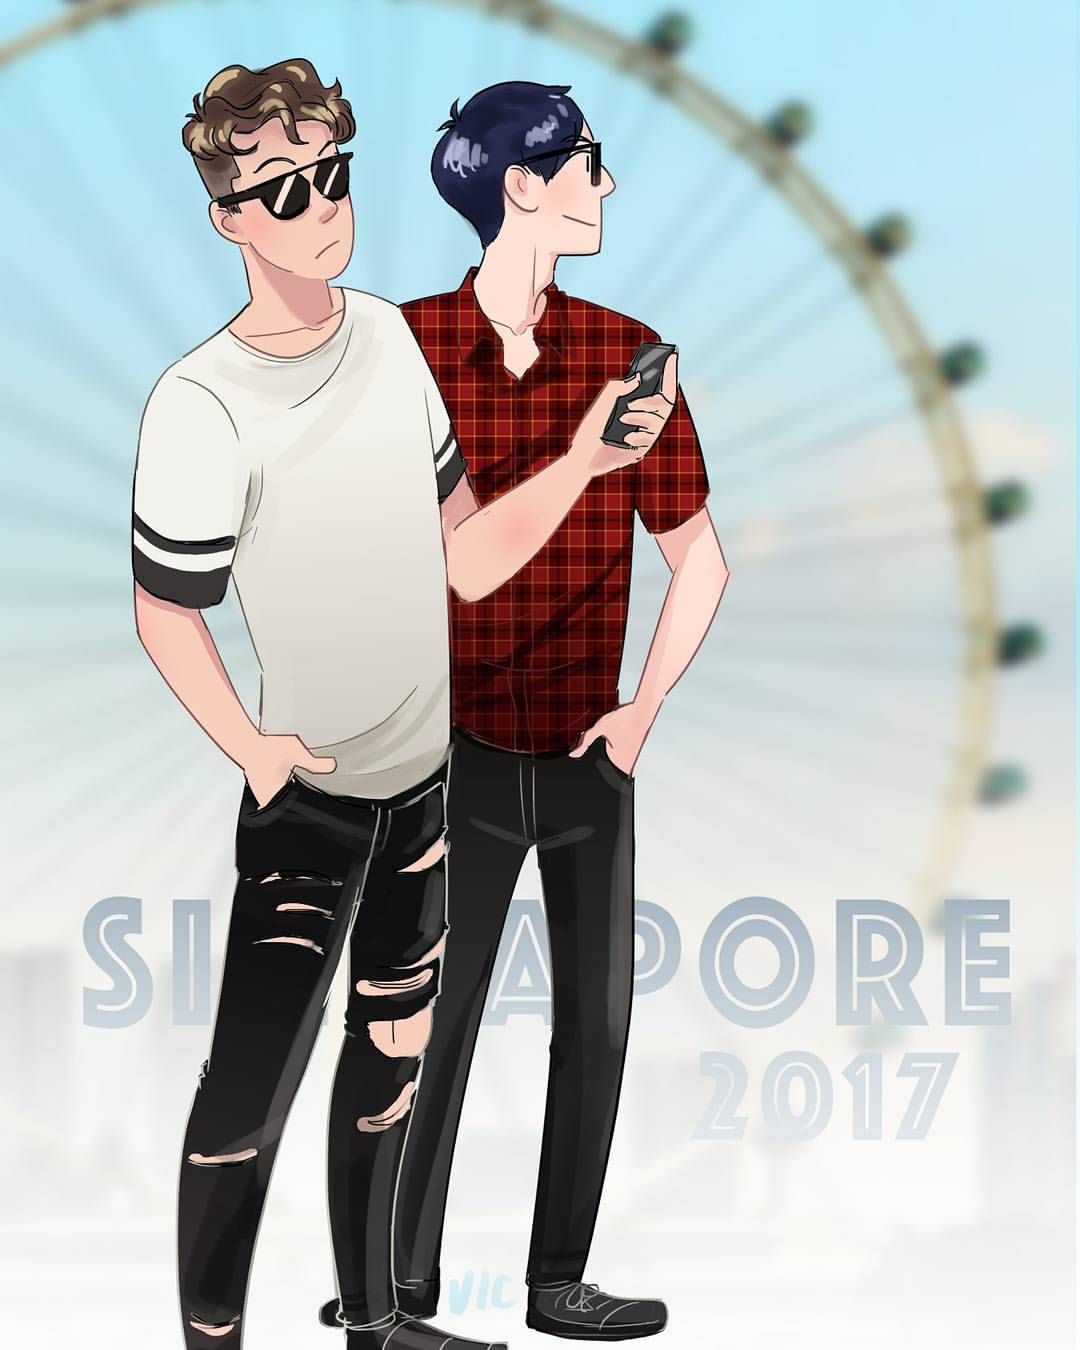 Singapooooore Mostly I Just Wanted To Draw The Ripped Jeans Haha